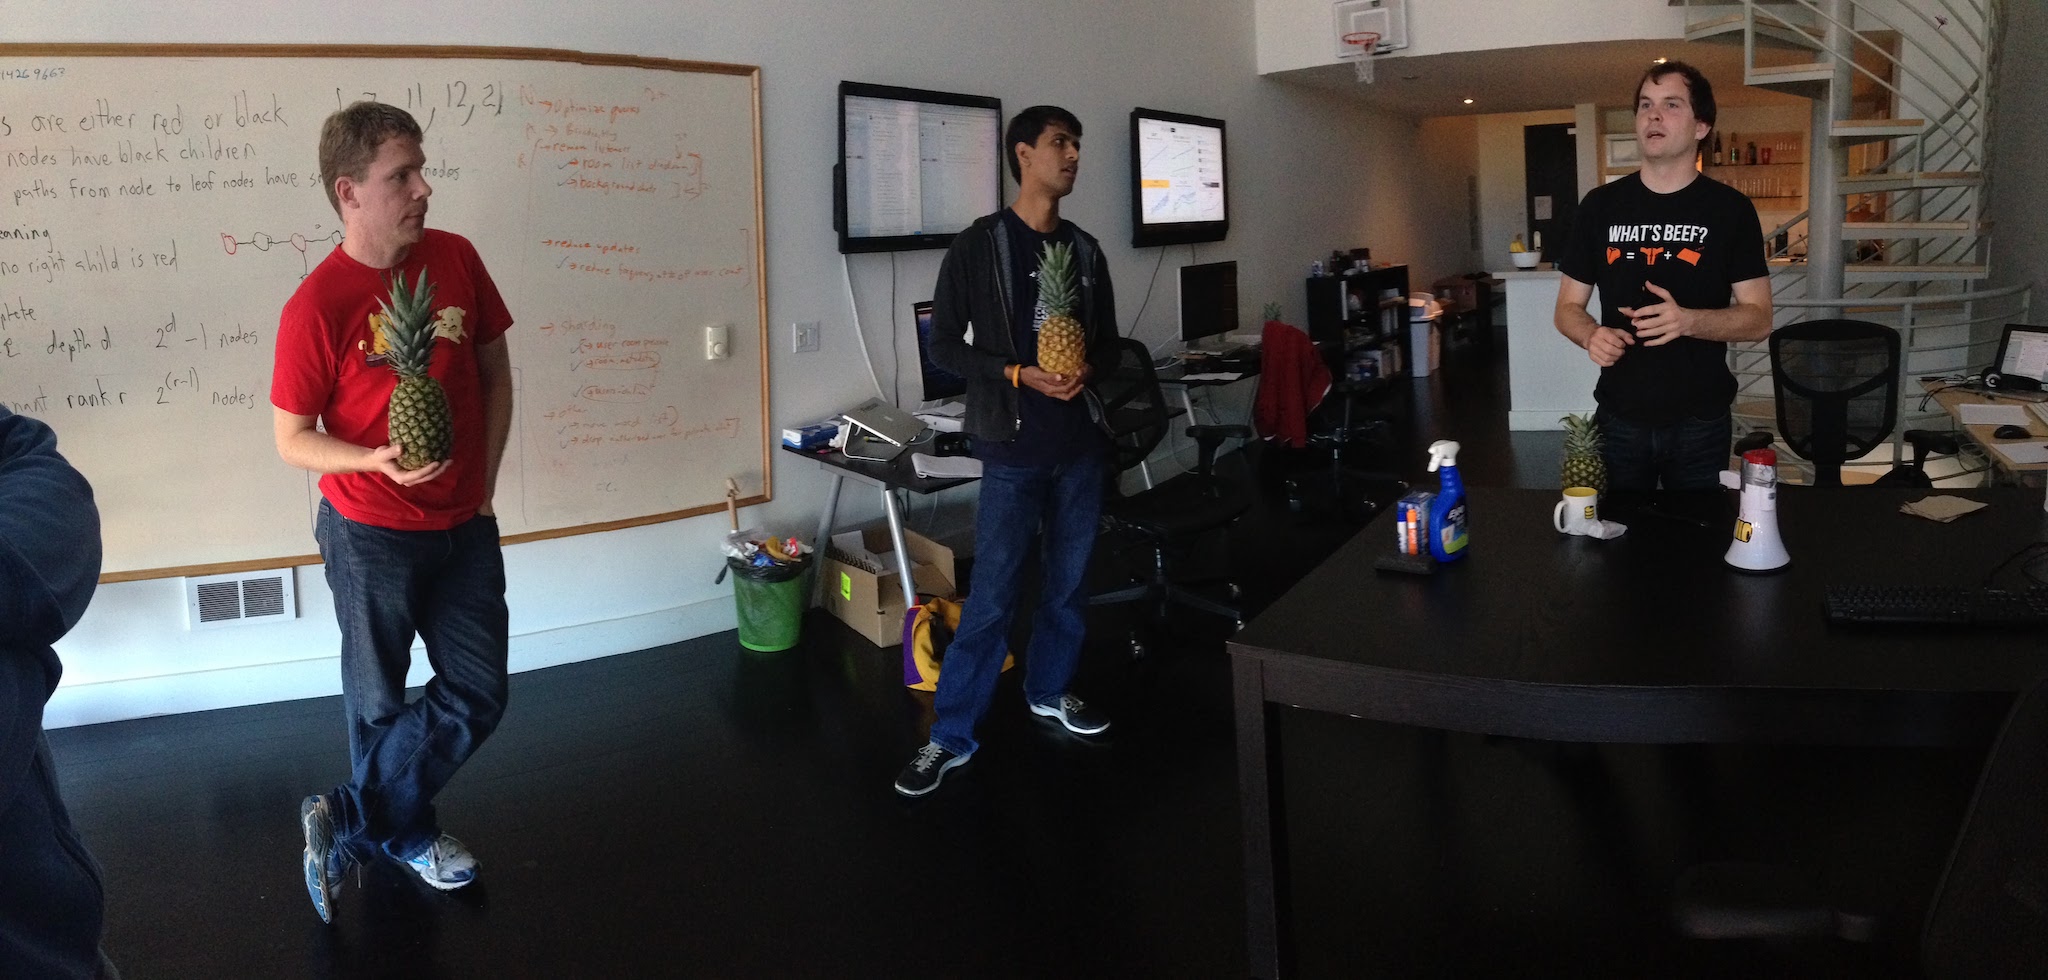 Michael, Anant, and I discussing pineapples at daily standup.